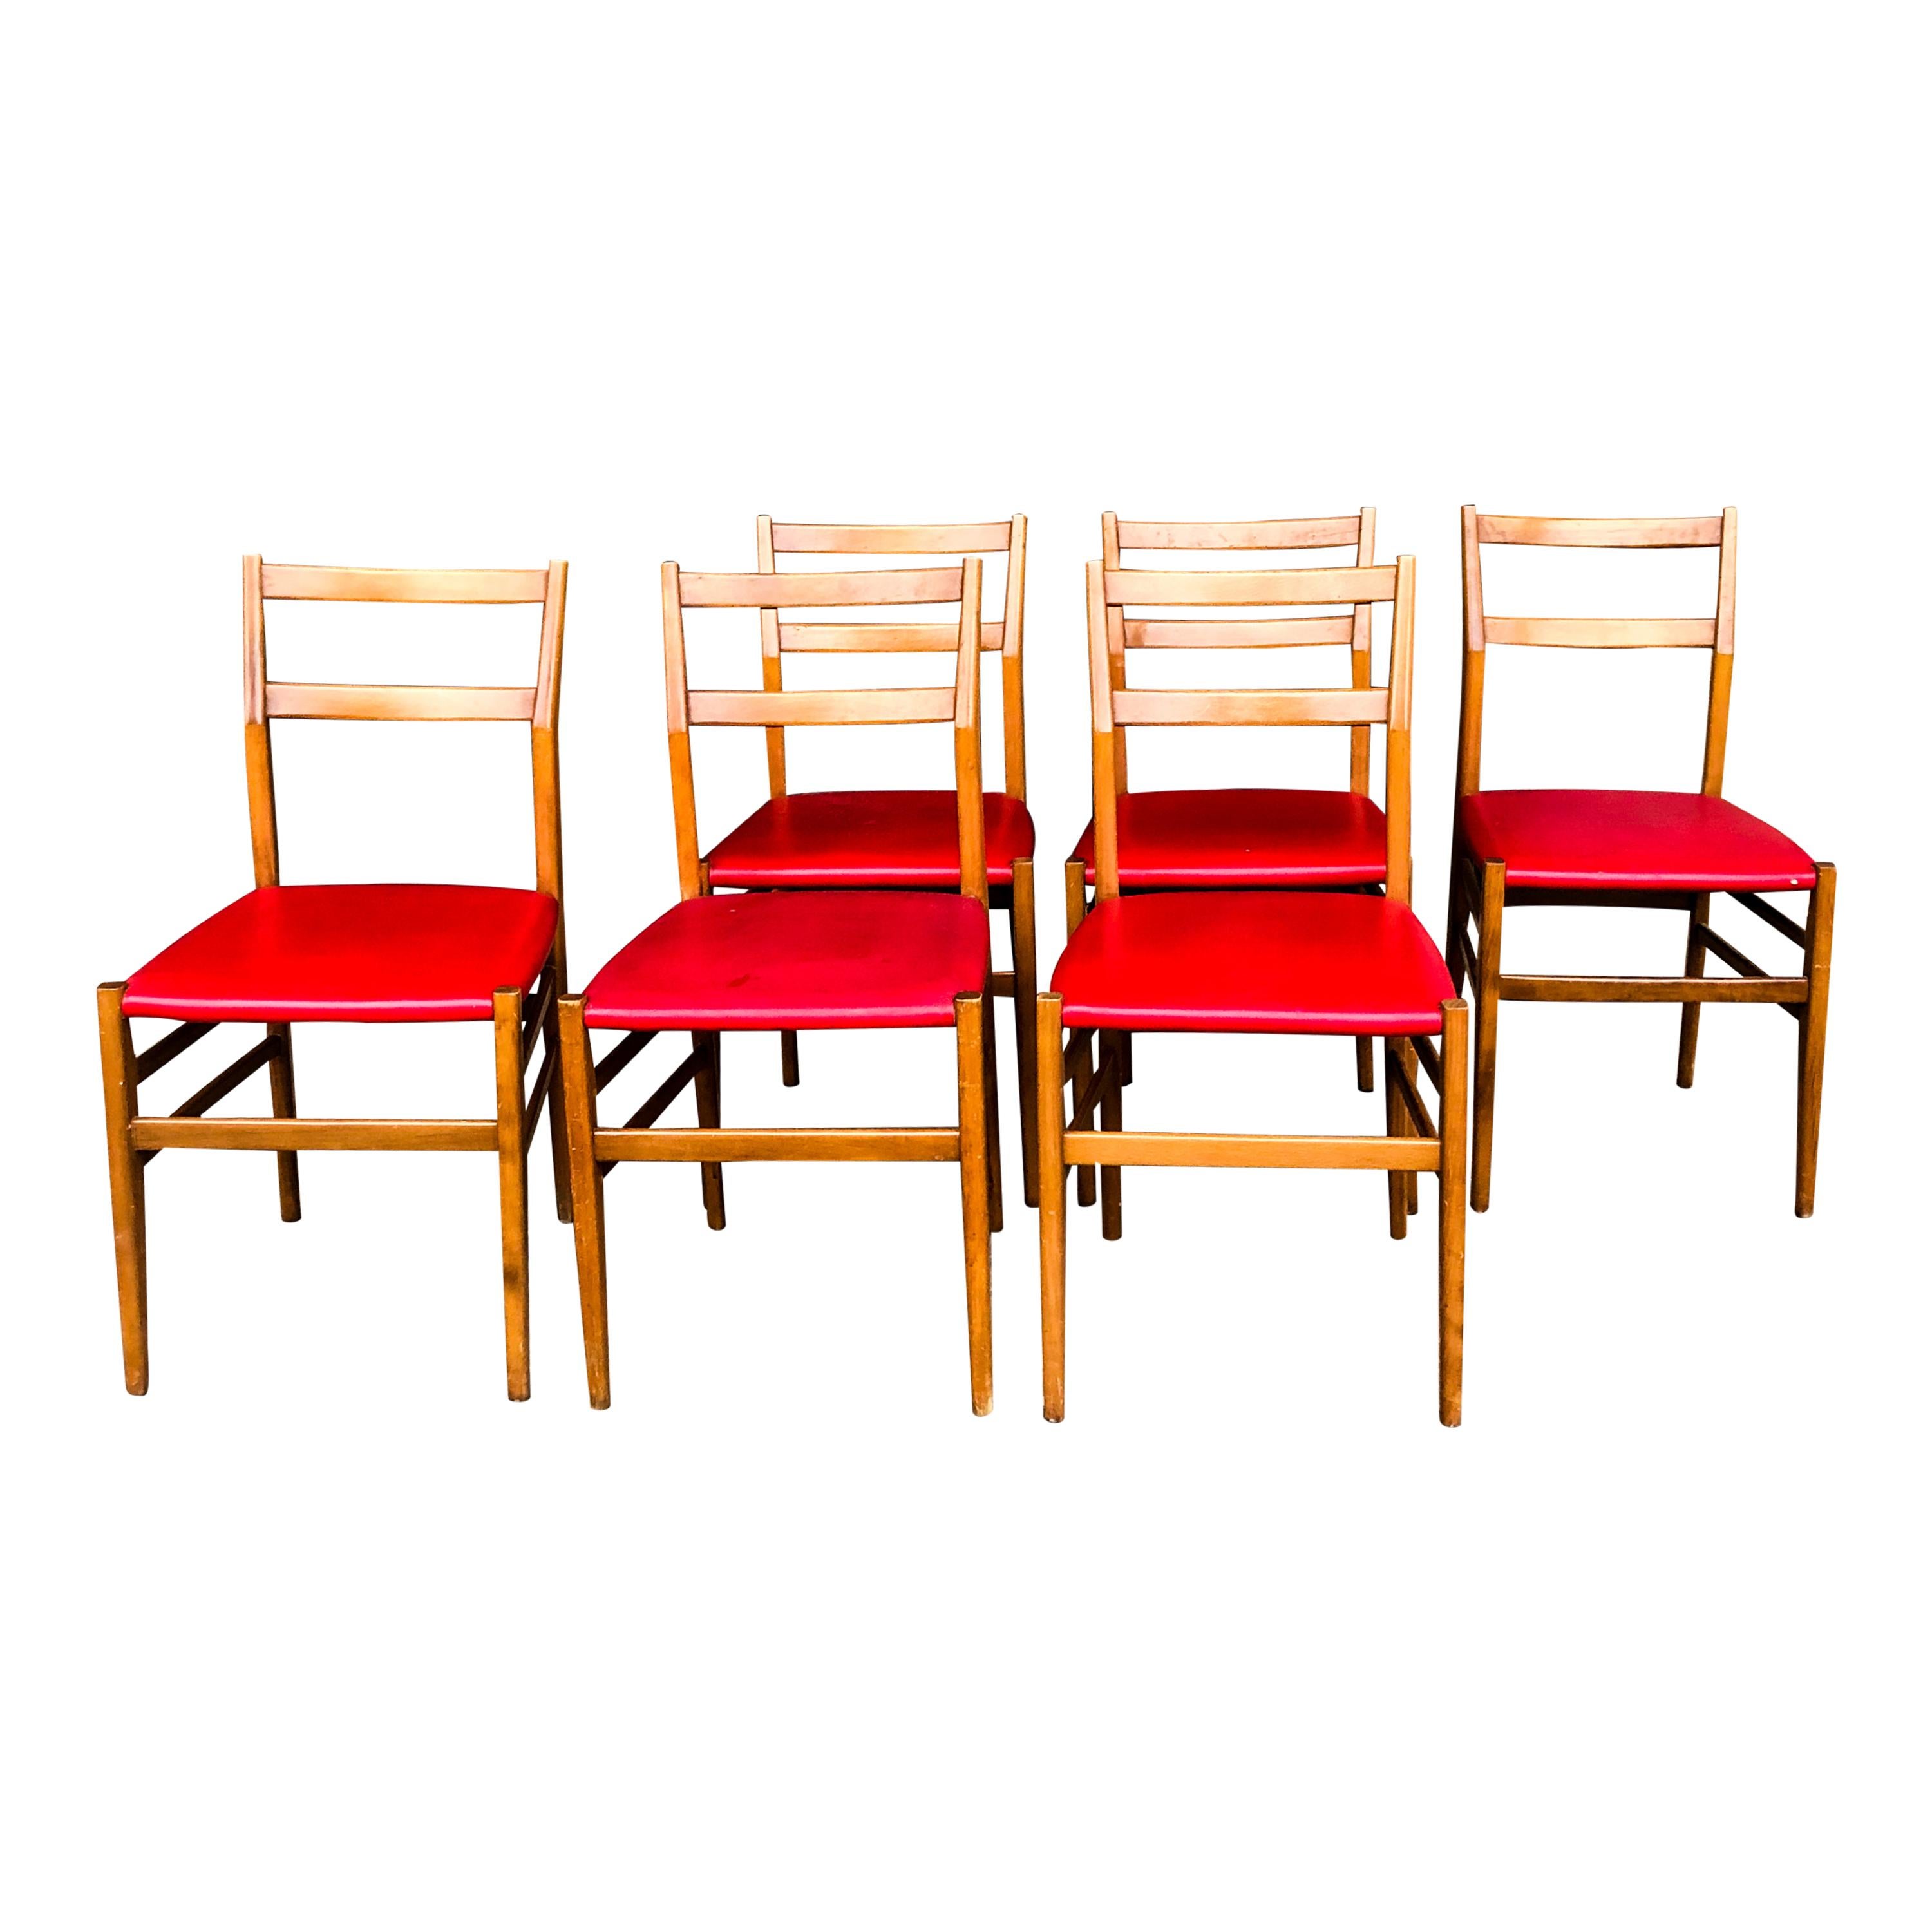 Italian Red Faux Leather Leggera Dining Chairs by Gio Ponti for Cassina, 1960s, Set of 6 For Sale